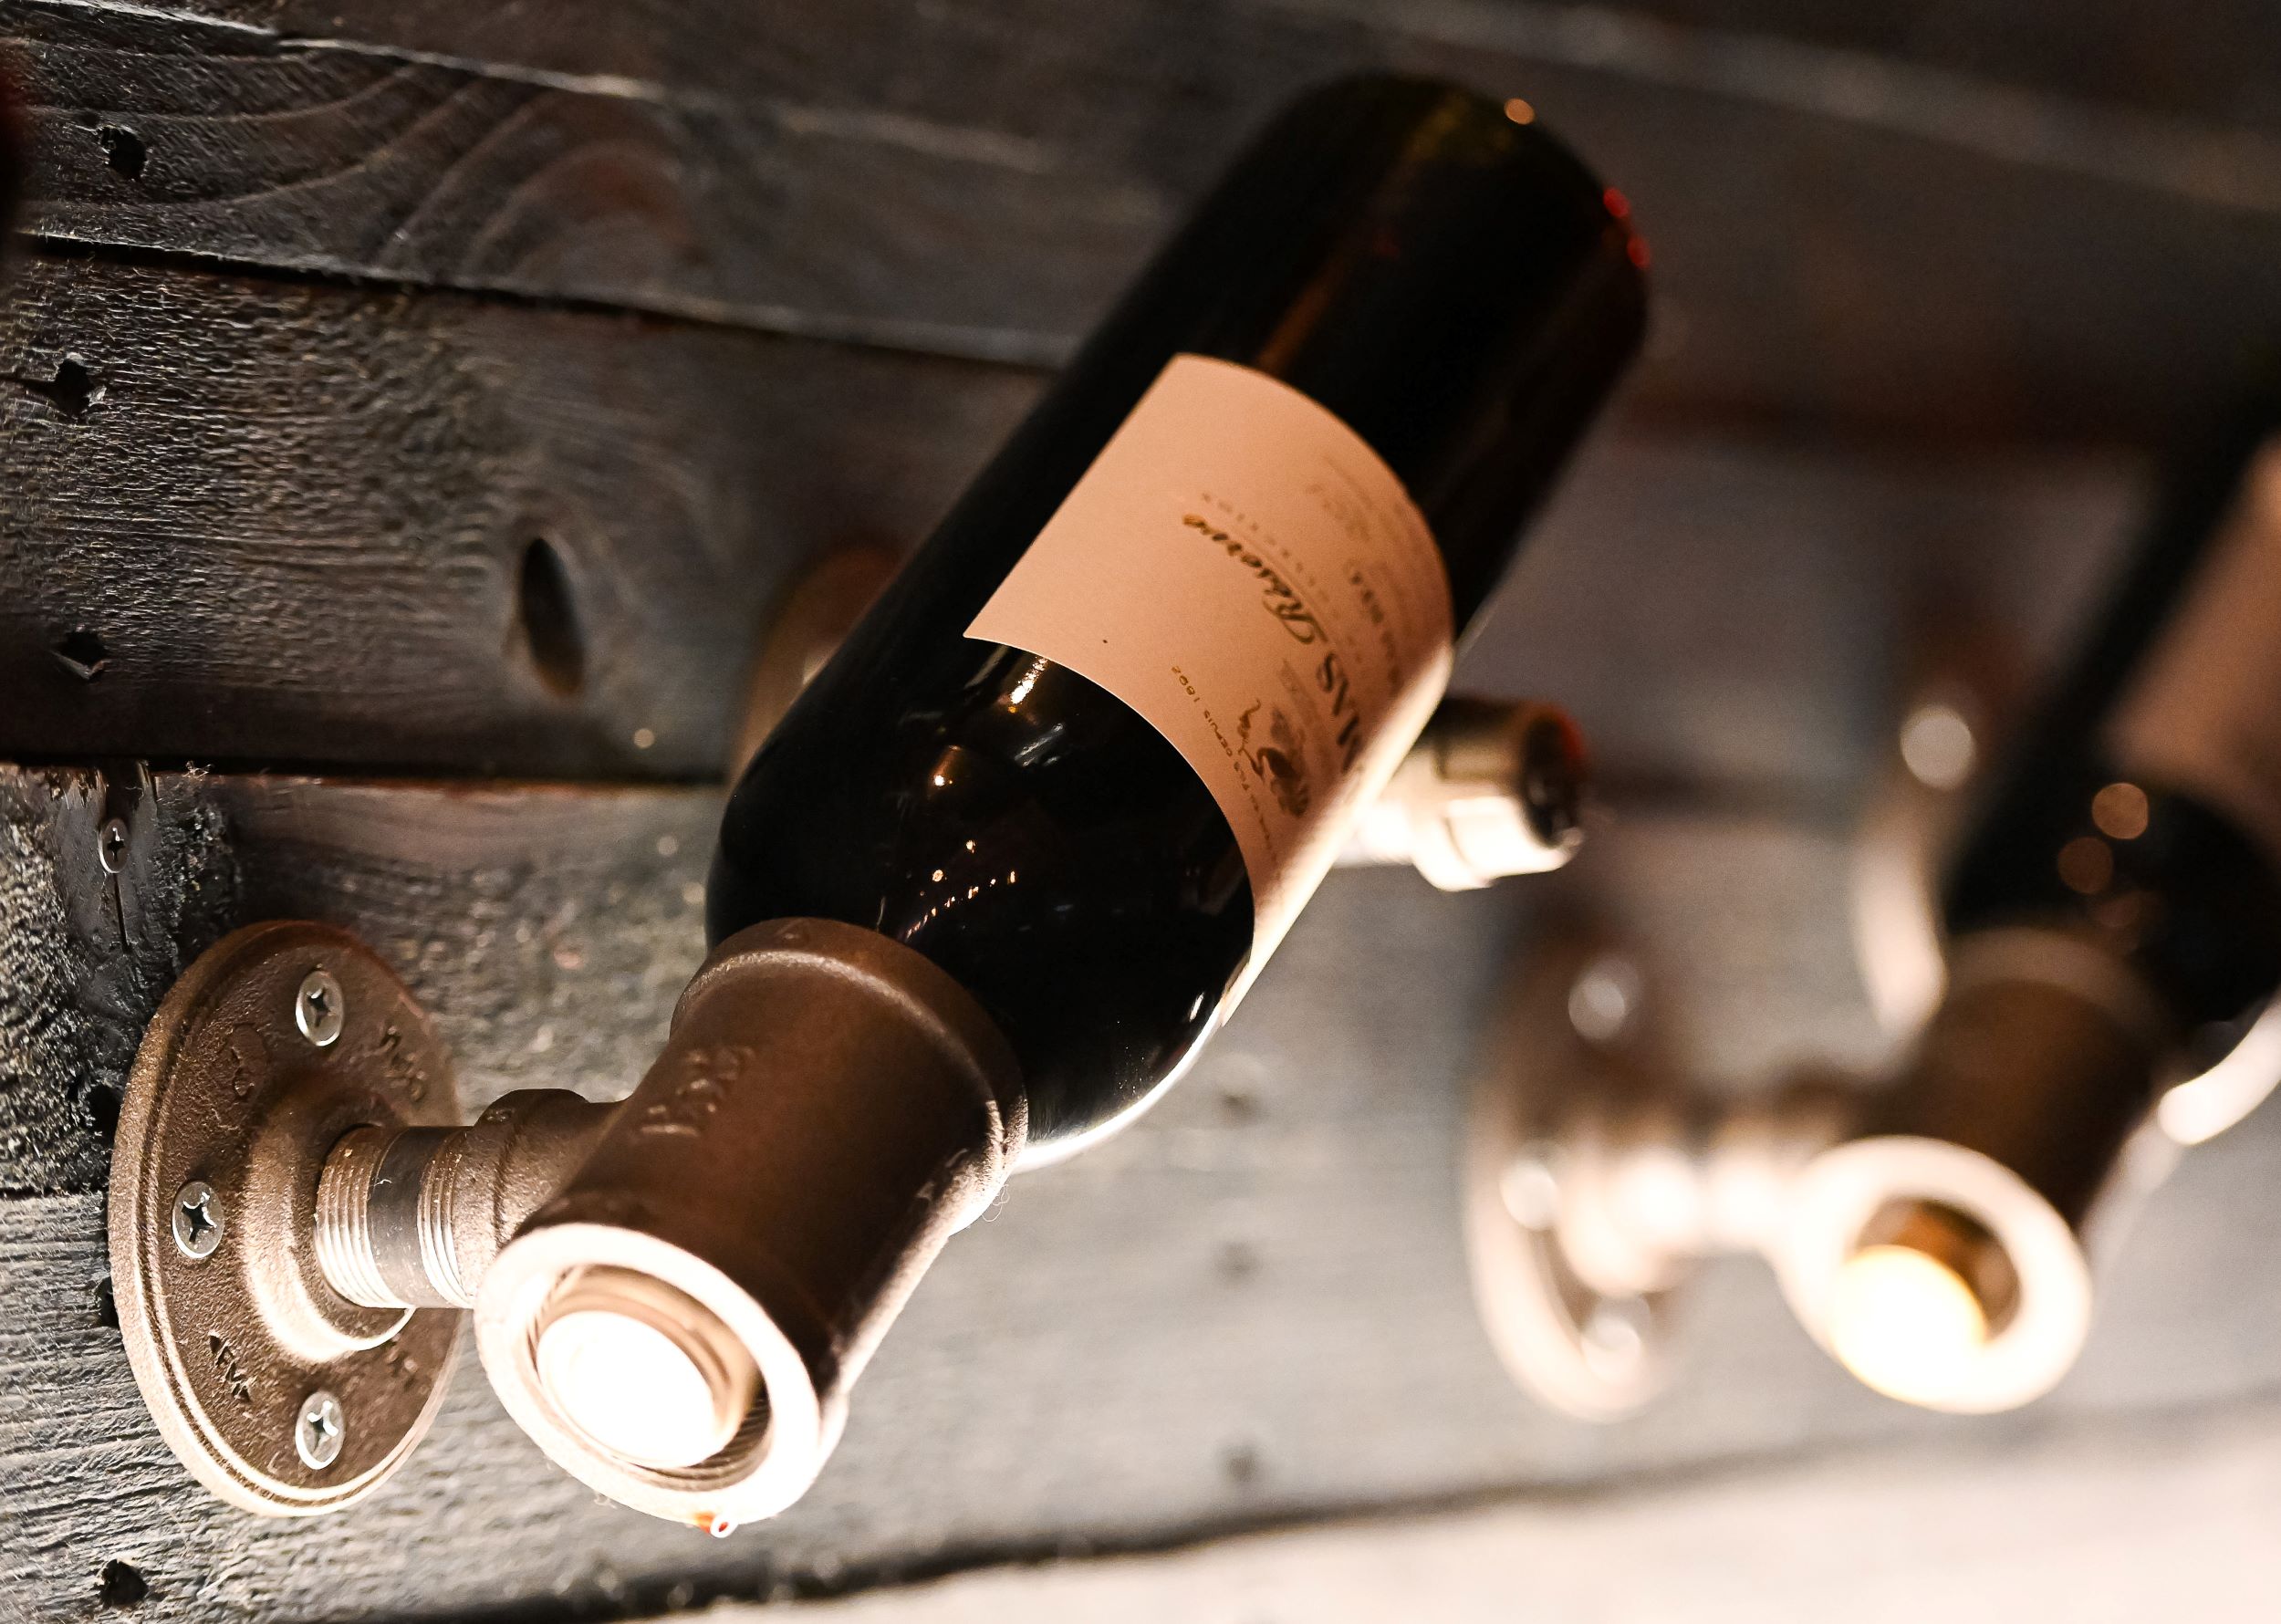 Bottles of wine horizontally mounted on a rustic wooden rack with metal brackets, focusing on one bottle in sharp detail.